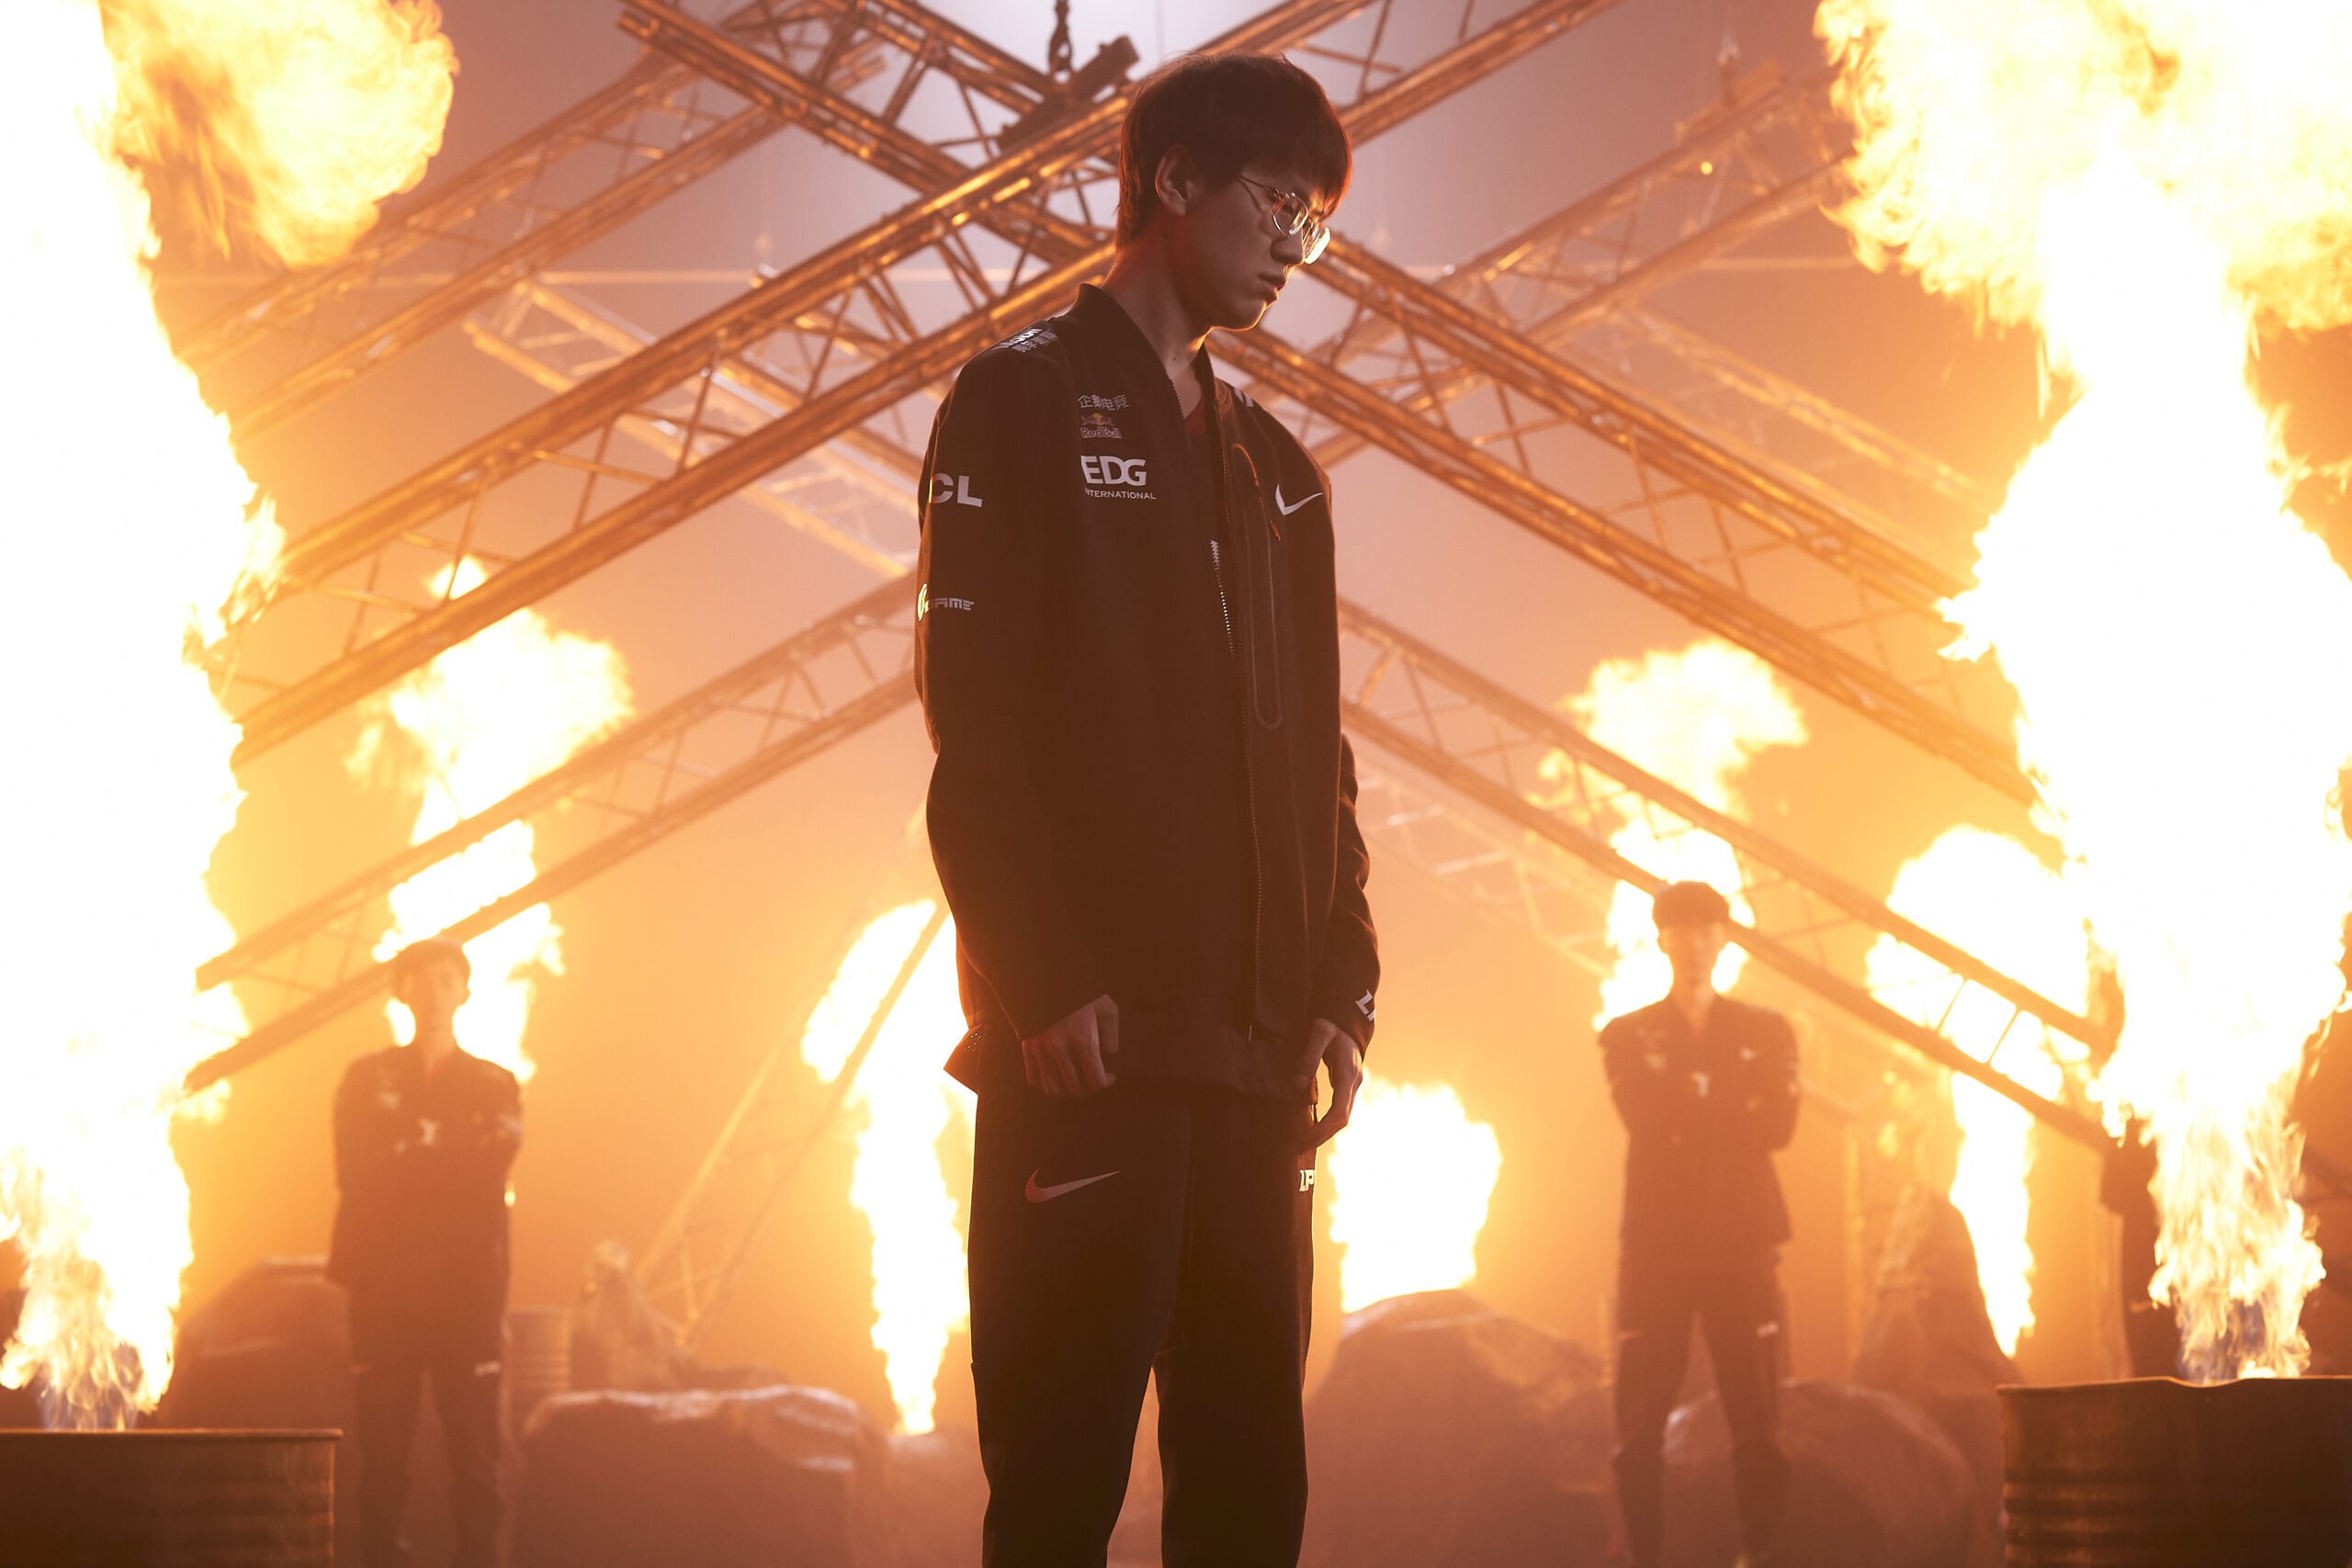 Meiko stands in front of EDG amidst fire